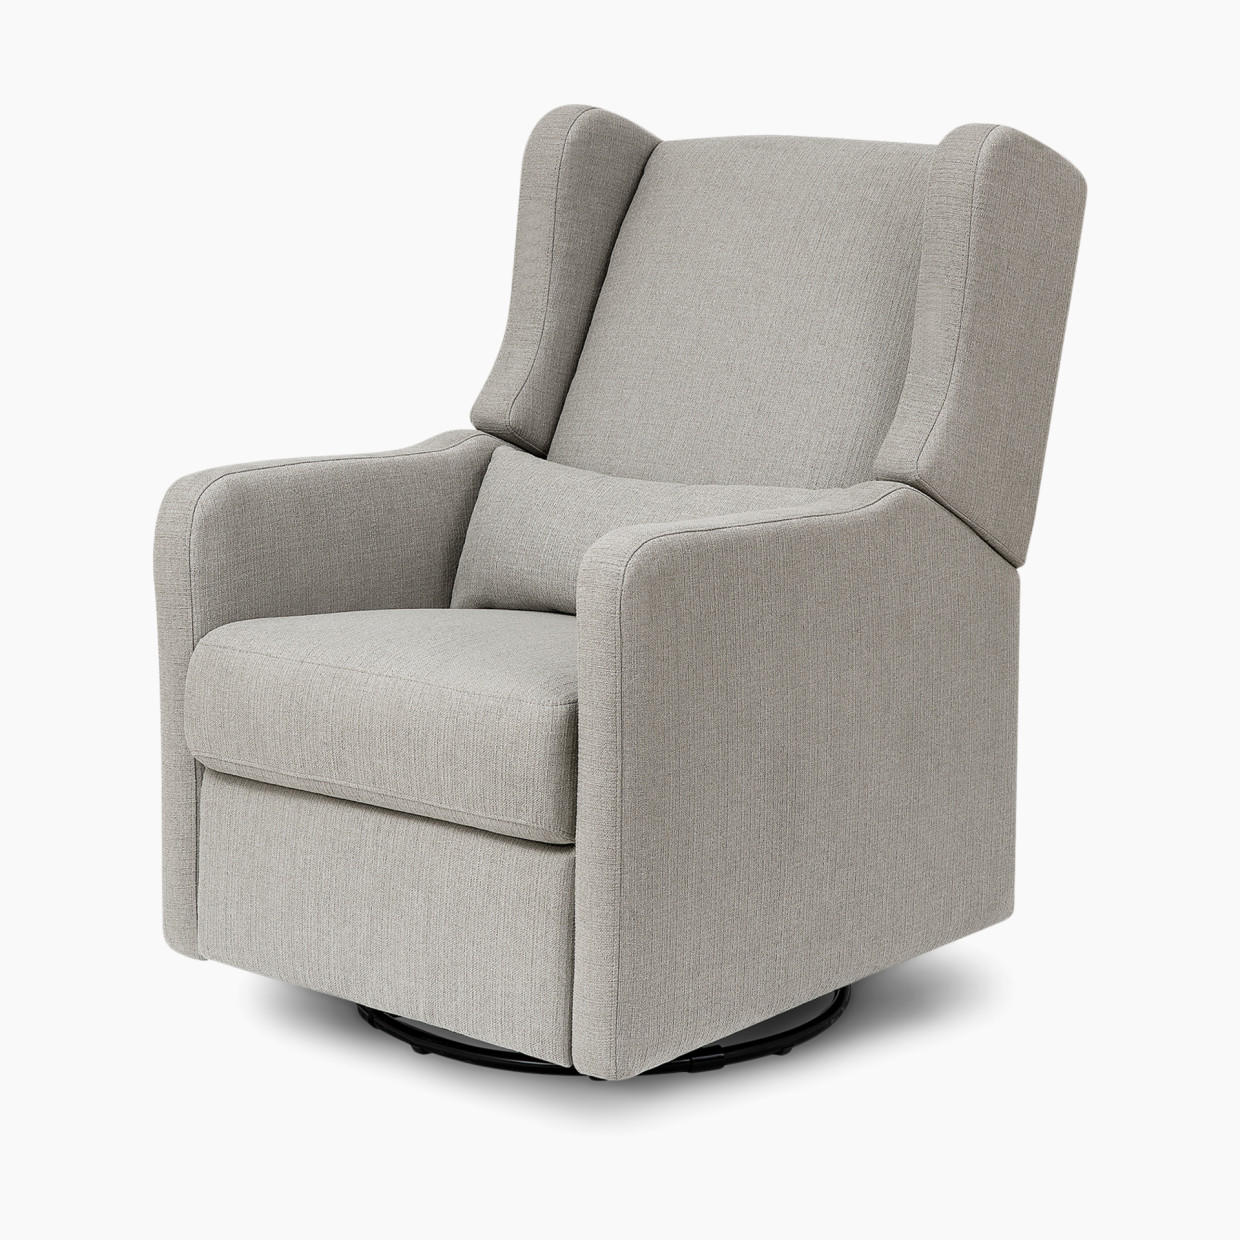 Carter's by DaVinci Arlo Recliner and Swivel Glider - Performance Grey Linen.